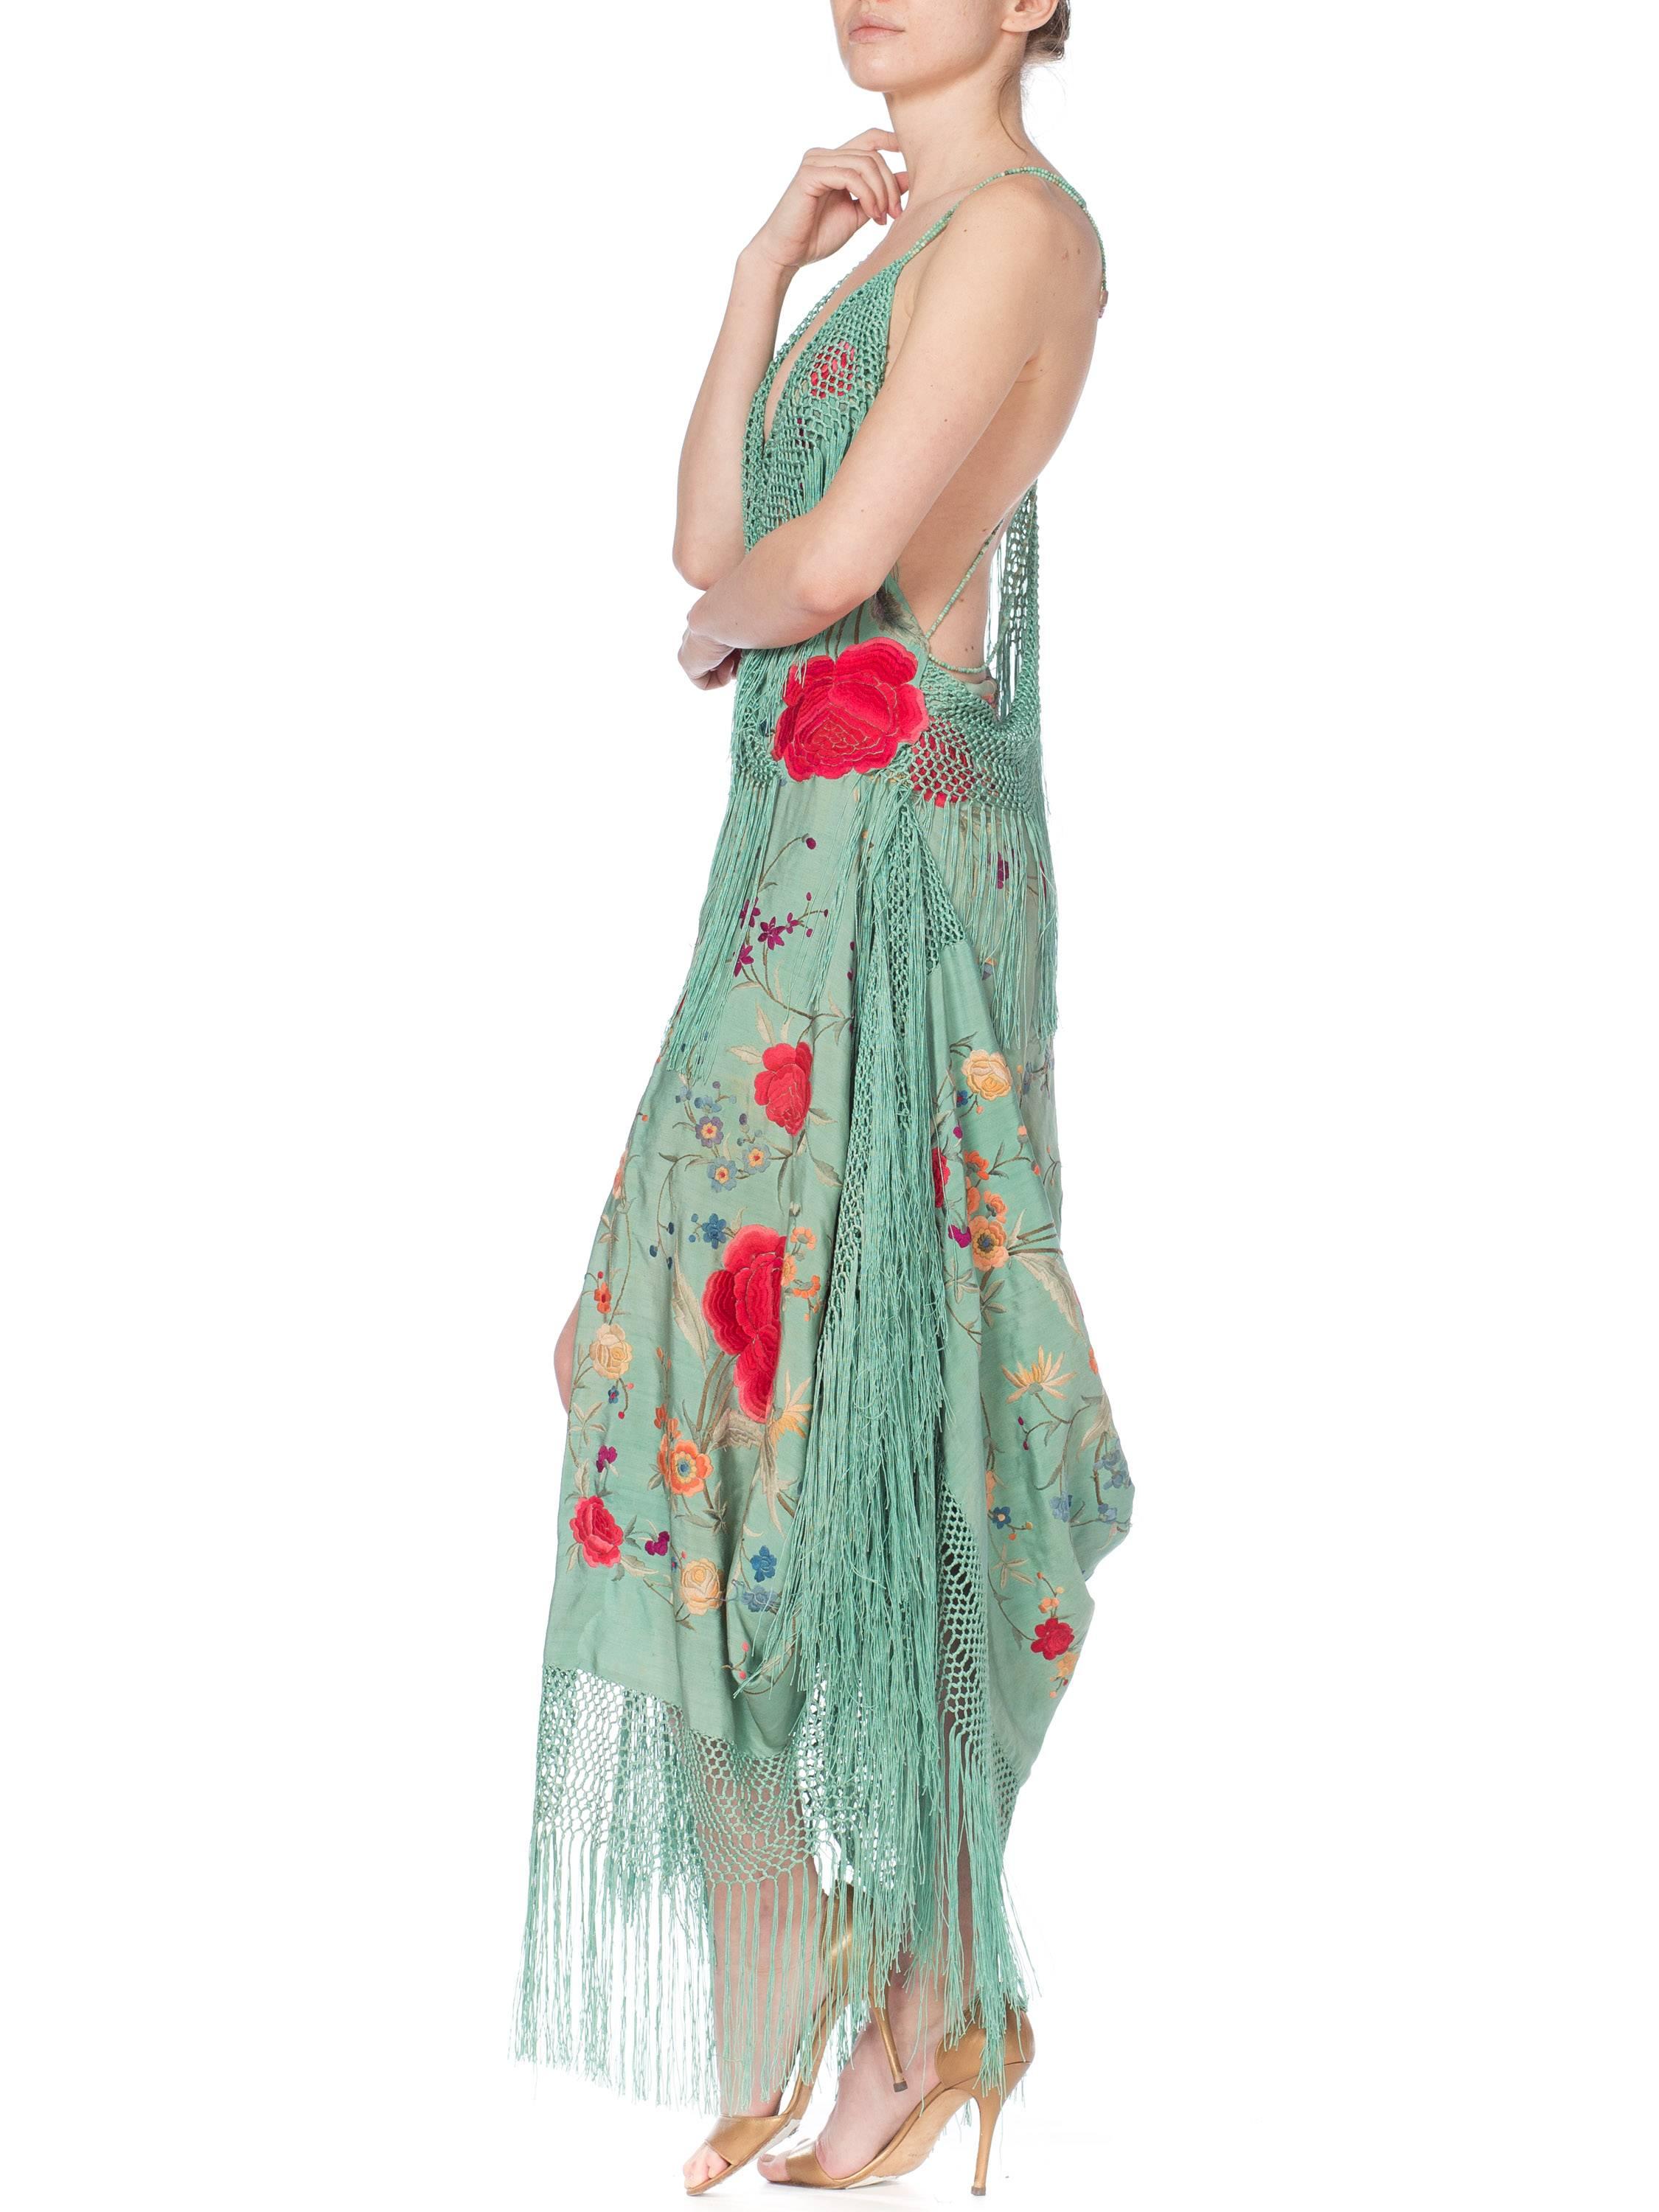 Morphew Collection Jade Piano Shawl Backless Dress with Fringe Train, 1920s  5